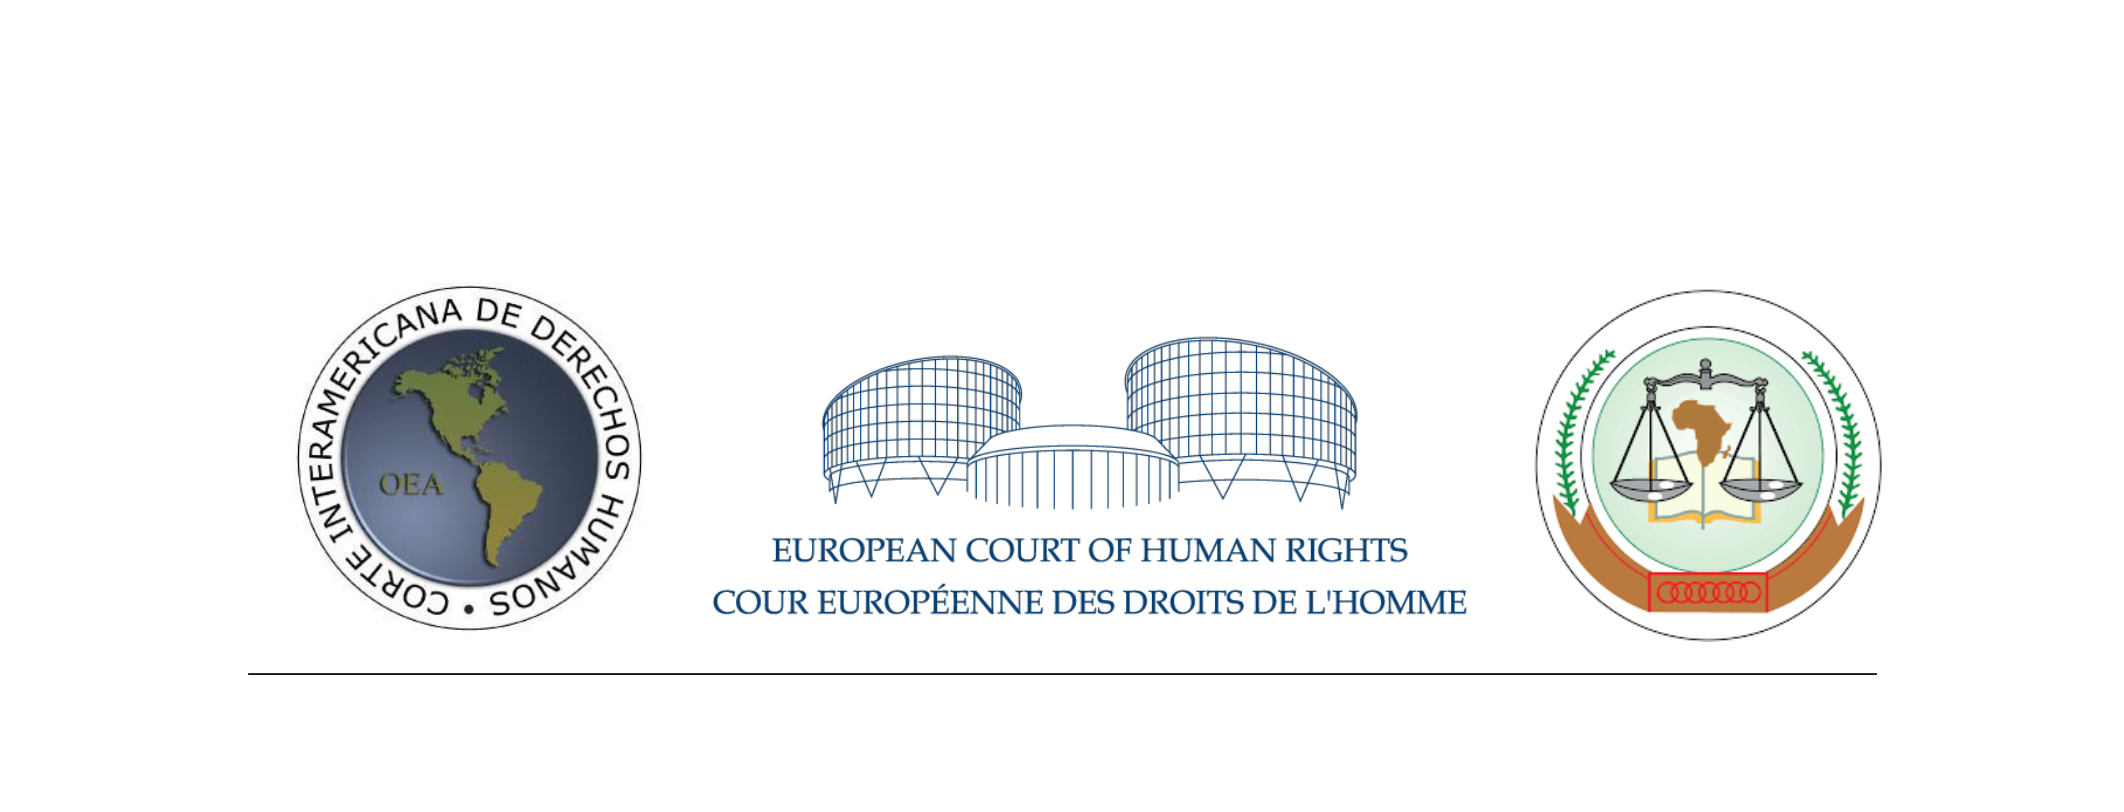 INTERNATIONAL HUMAN RIGHTS COURTS TO CONVENE FOR THIRD EDITION IN COSTA RICA ON MAY 25